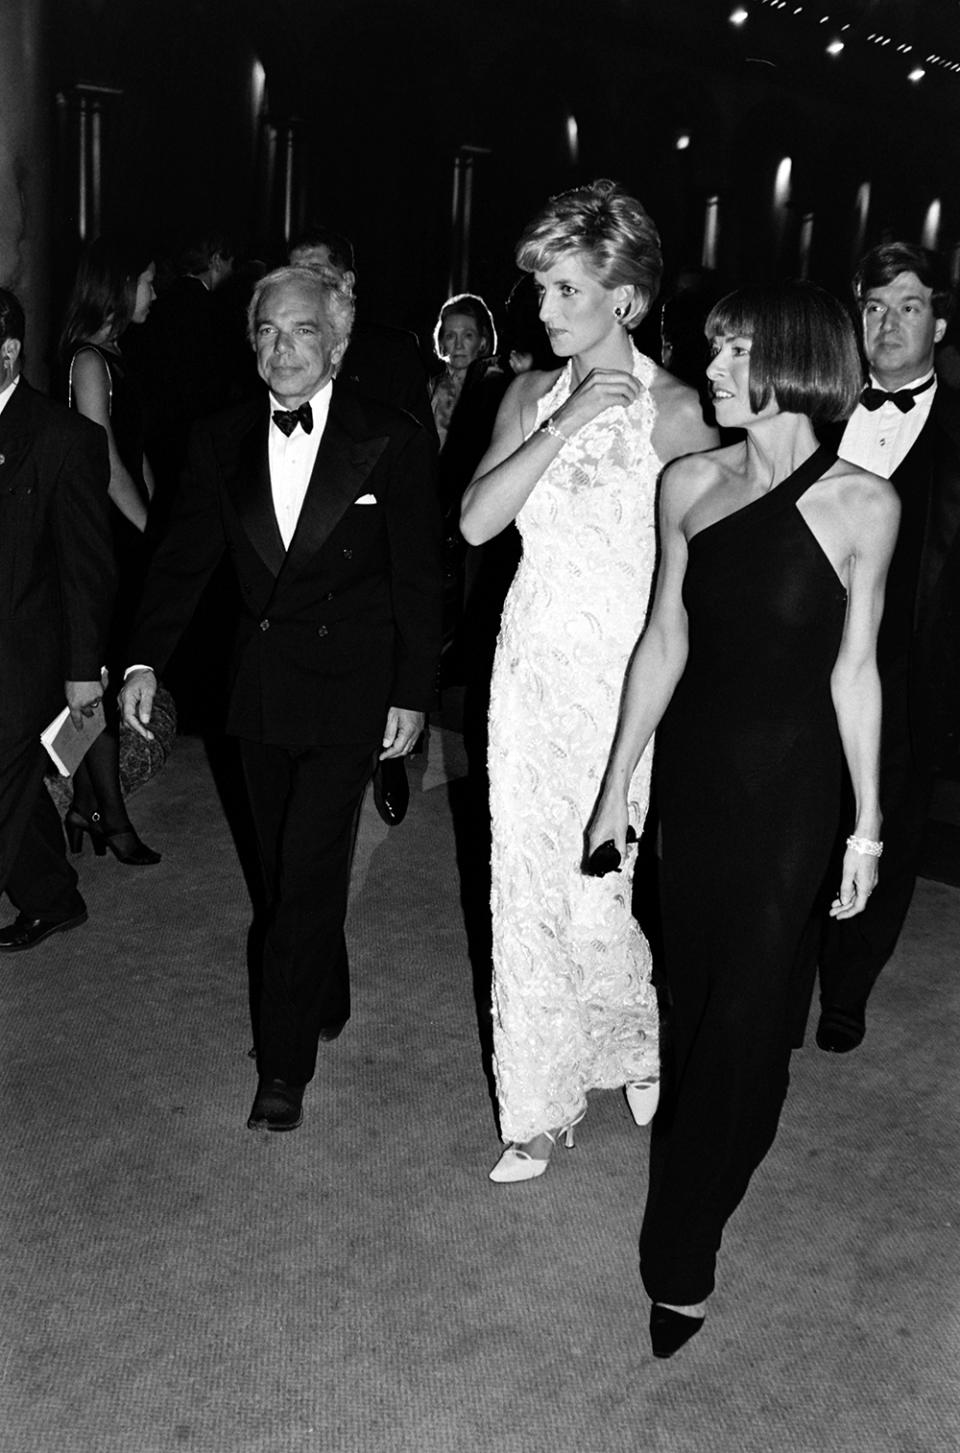 (L-R, foreground) Ralph Lauren; Diana Spencer, Princess of Wales; and Anna Wintour attend the Super Sale gala fundraiser, benefitting the Nina Hyde Center for Breast Cancer Research, at the National Building Museum in Washington, D.C., on September 25, 1966.